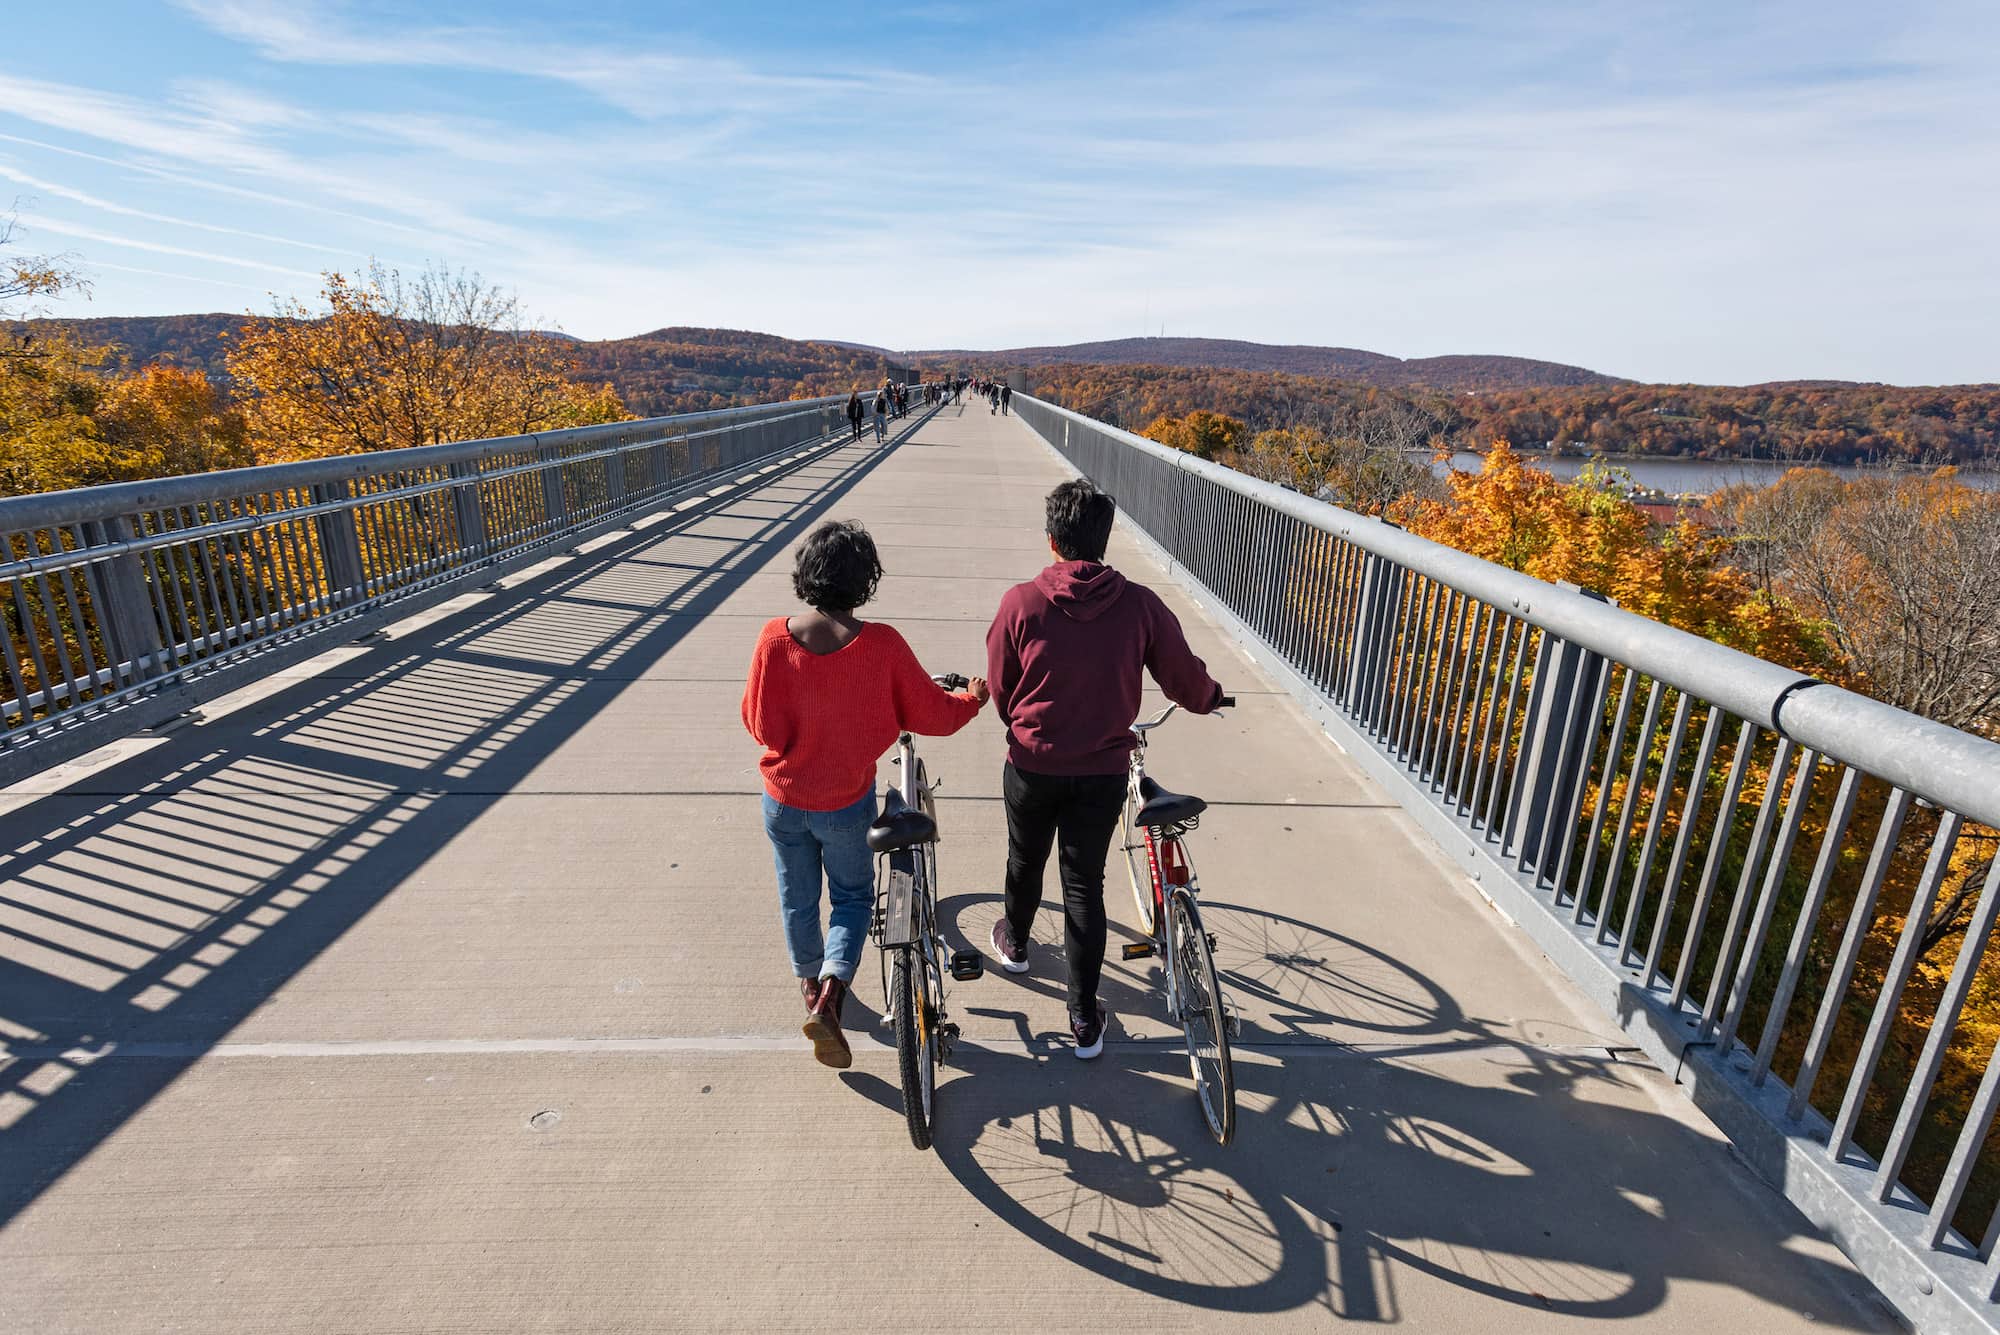 Two students facing away from the viewer wheel their bikes along a long concrete pathway on a bridge overlooking the Hudson river.